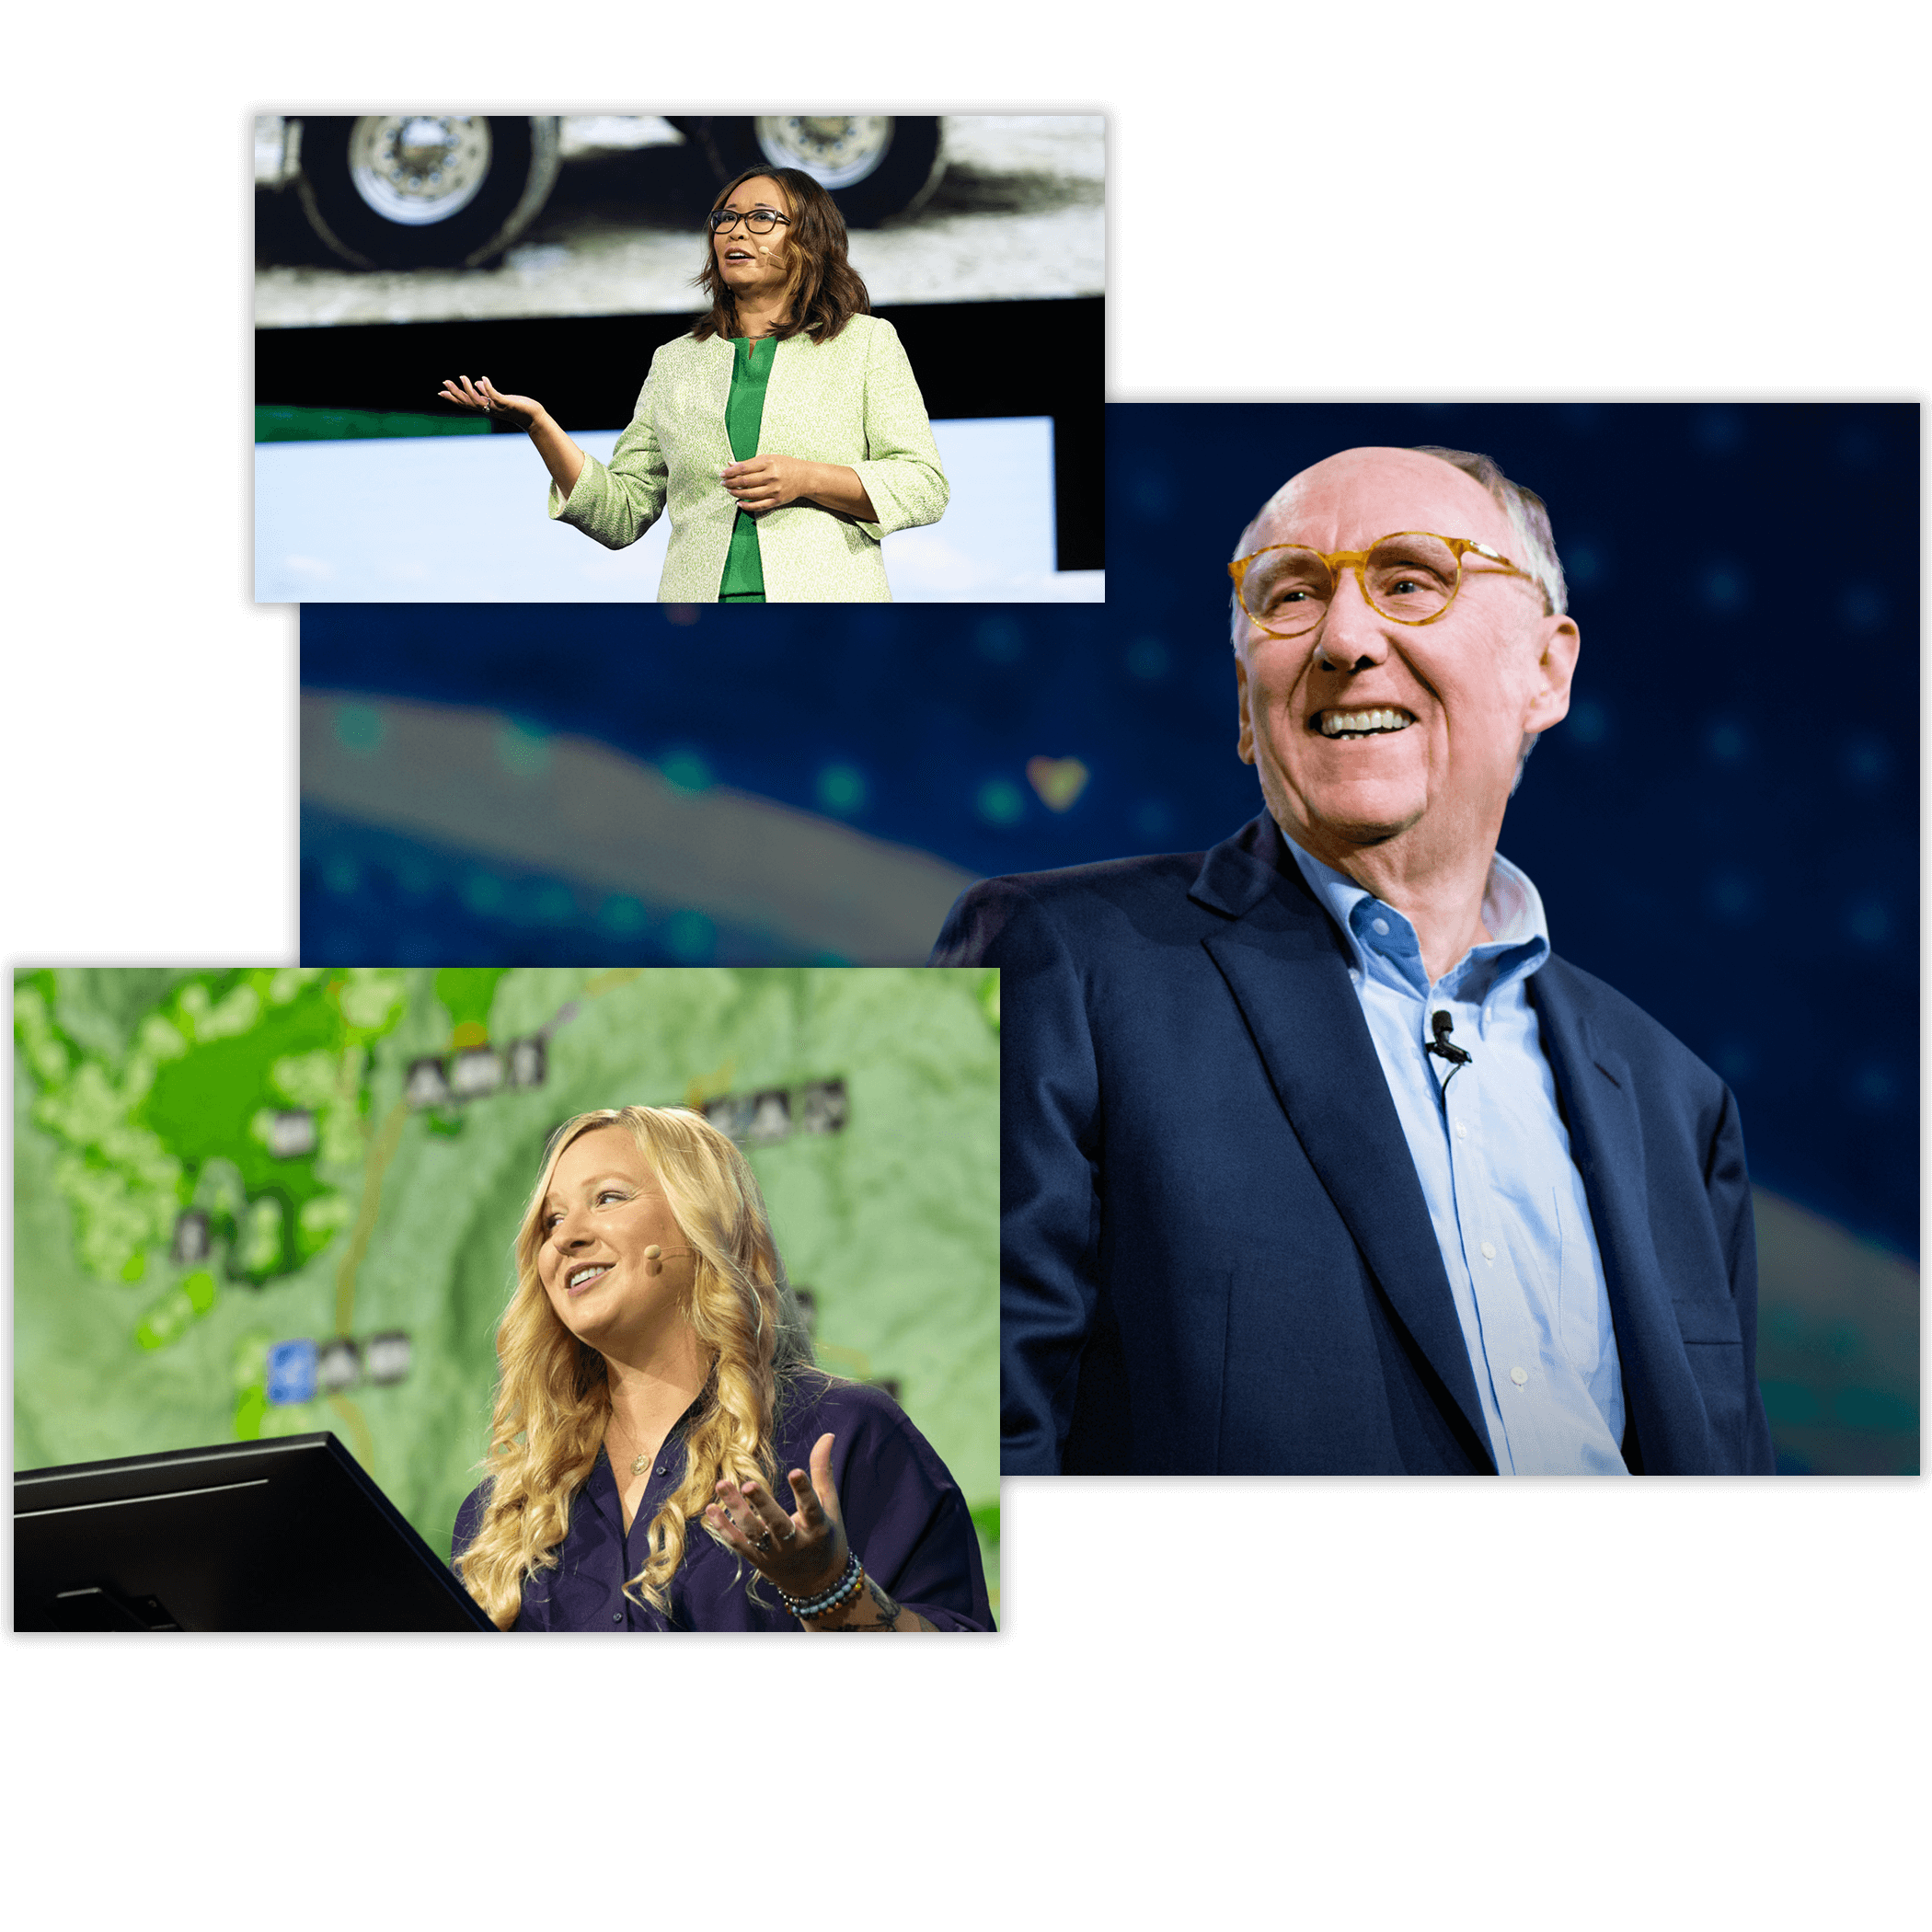 Photos of a presenter gesturing while speaking onstage, Esri president Jack Dangermond, and another speaker smiling